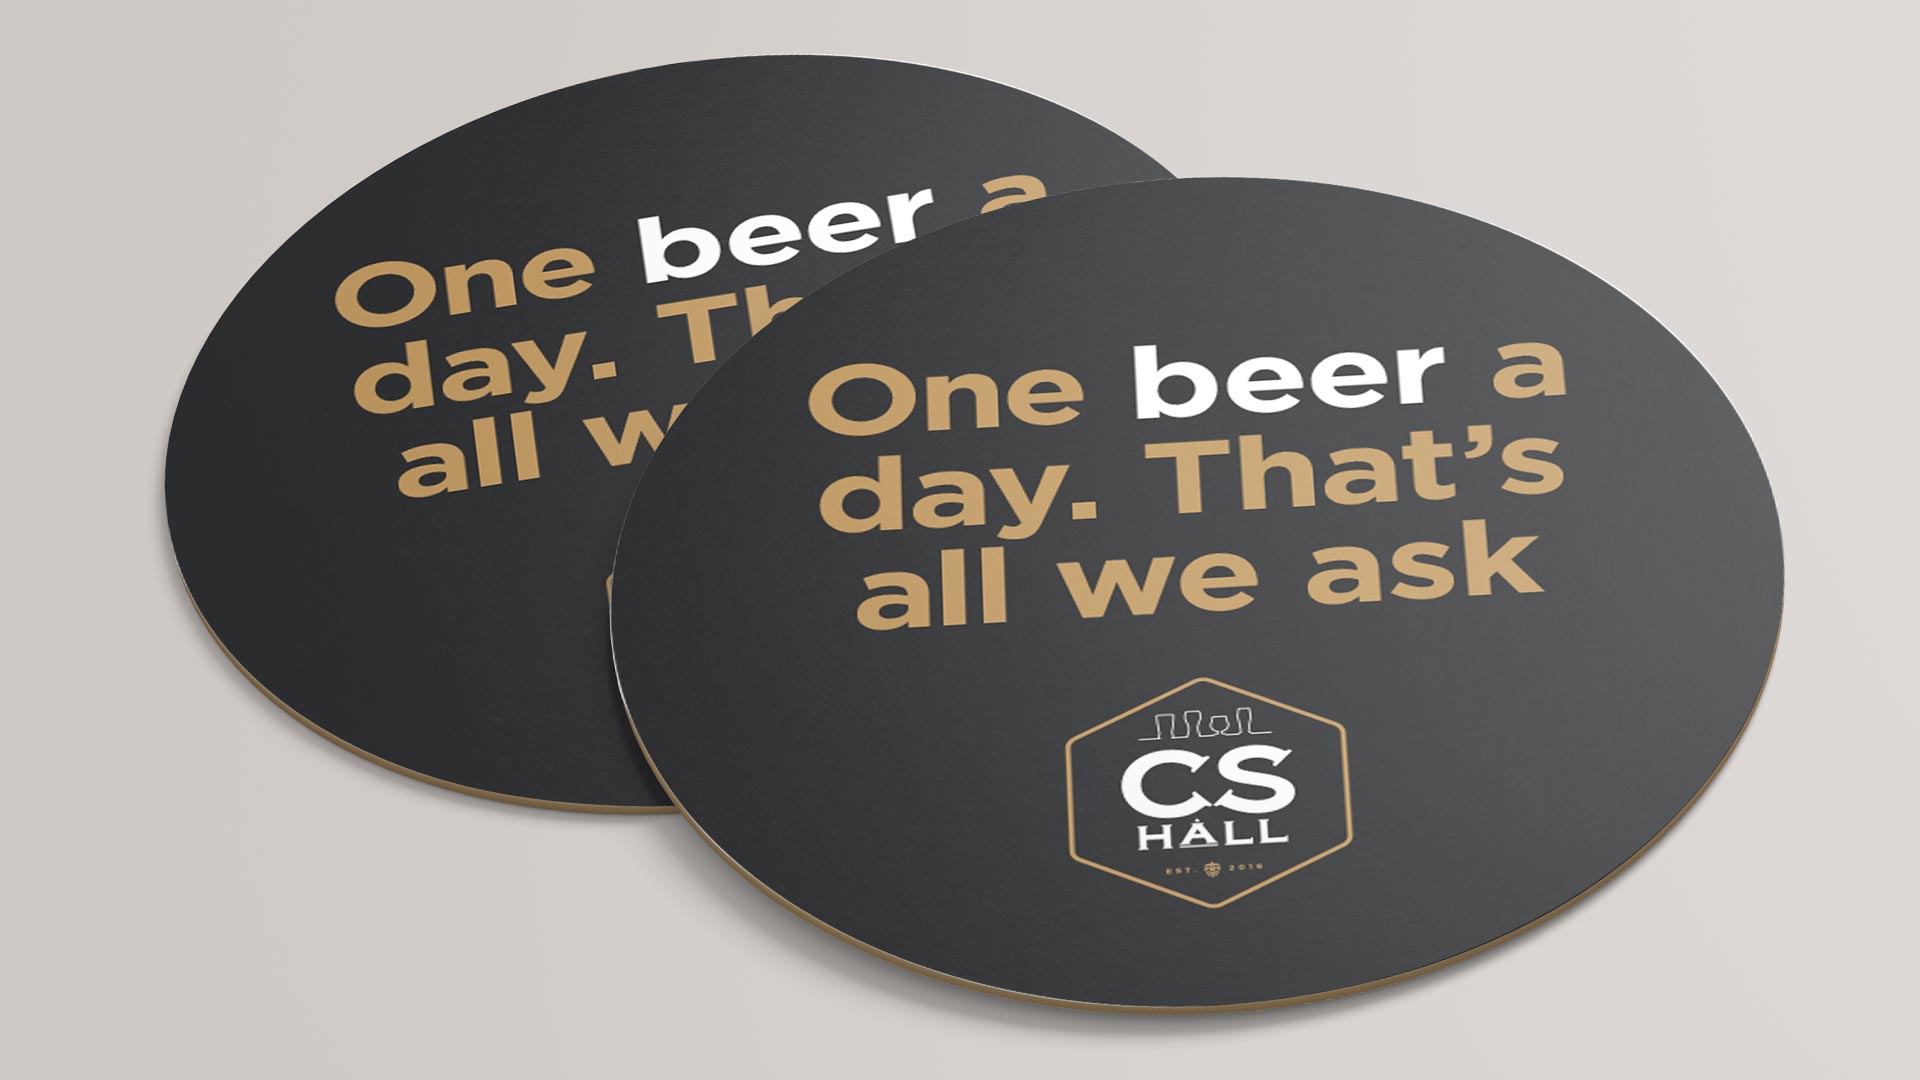 Cathedral Social Hall, Design, Cathedral Social Hall Coasters, Portfolio Image, Cathedral Social Hall Coaster - One beer a day. That's all we ask.